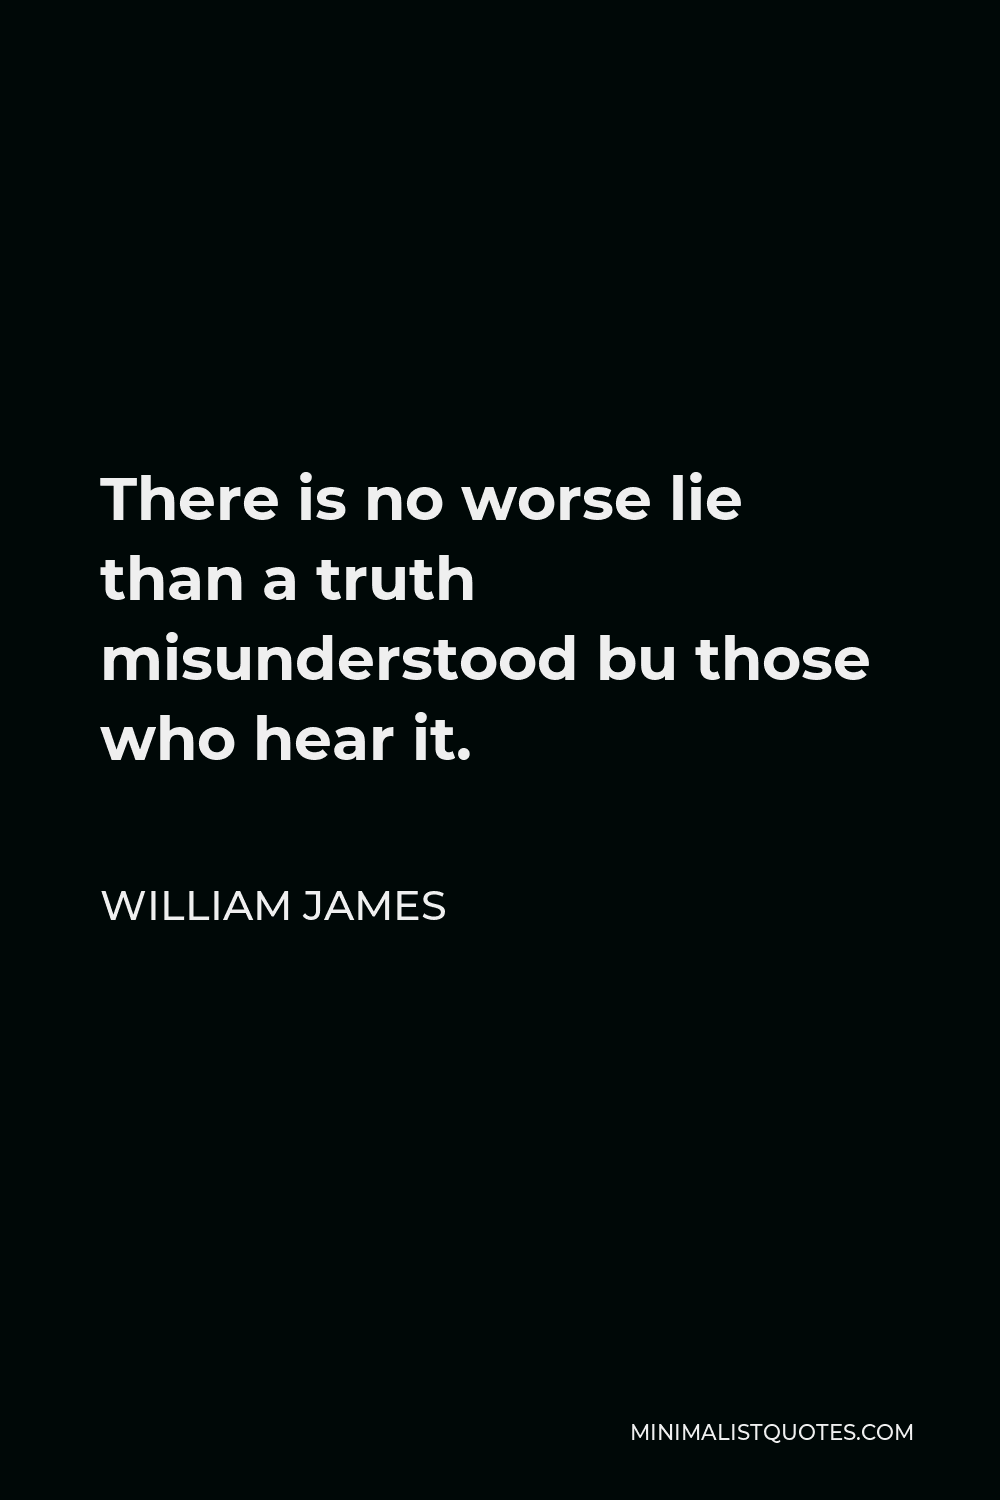 William James Quote - There is no worse lie than a truth misunderstood bu those who hear it.